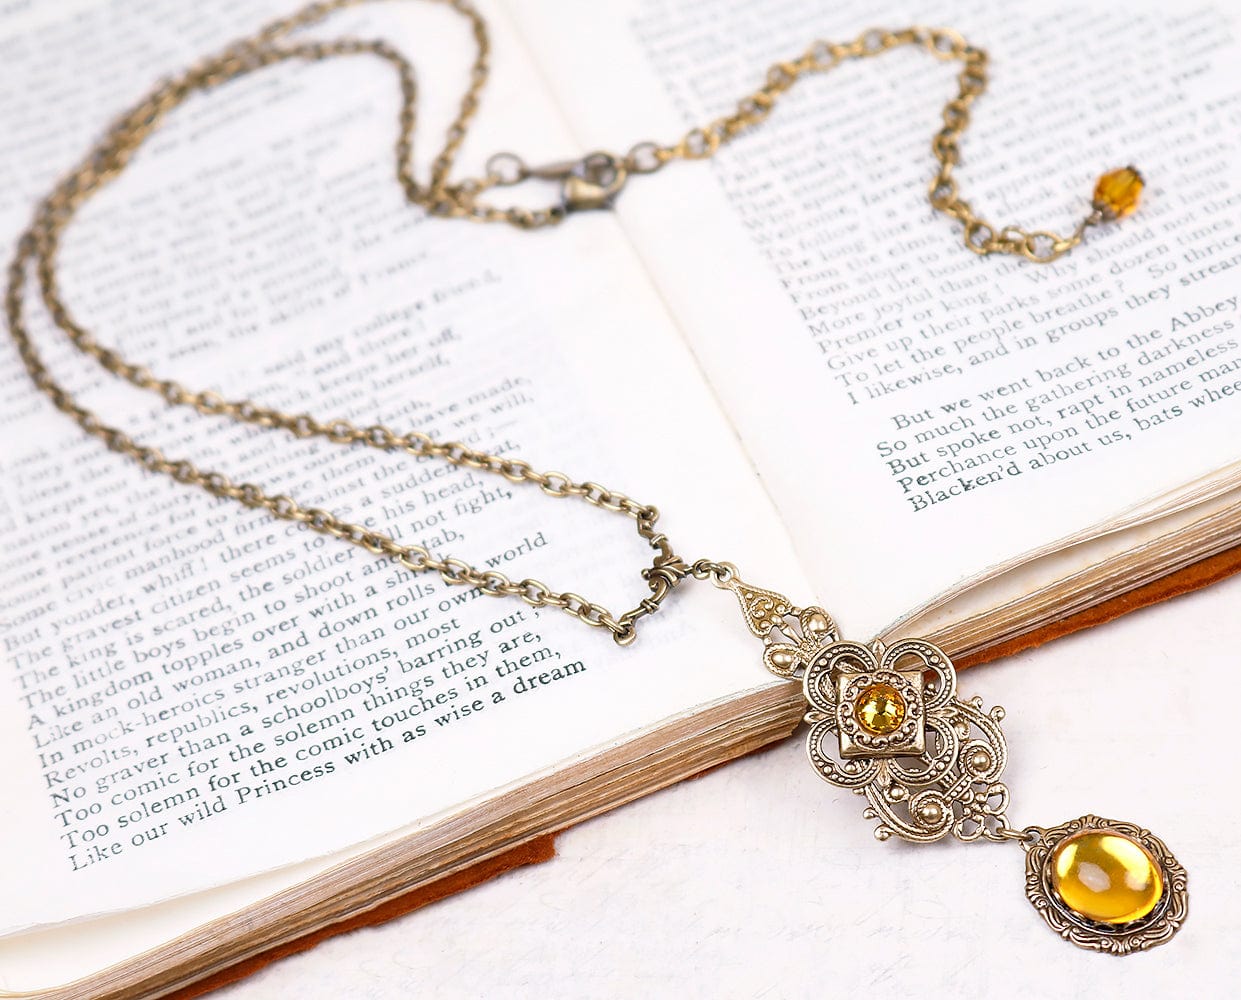 Avalon Pendant Necklace in Topaz and Antiqued Brass by Rabbitwood and Reason